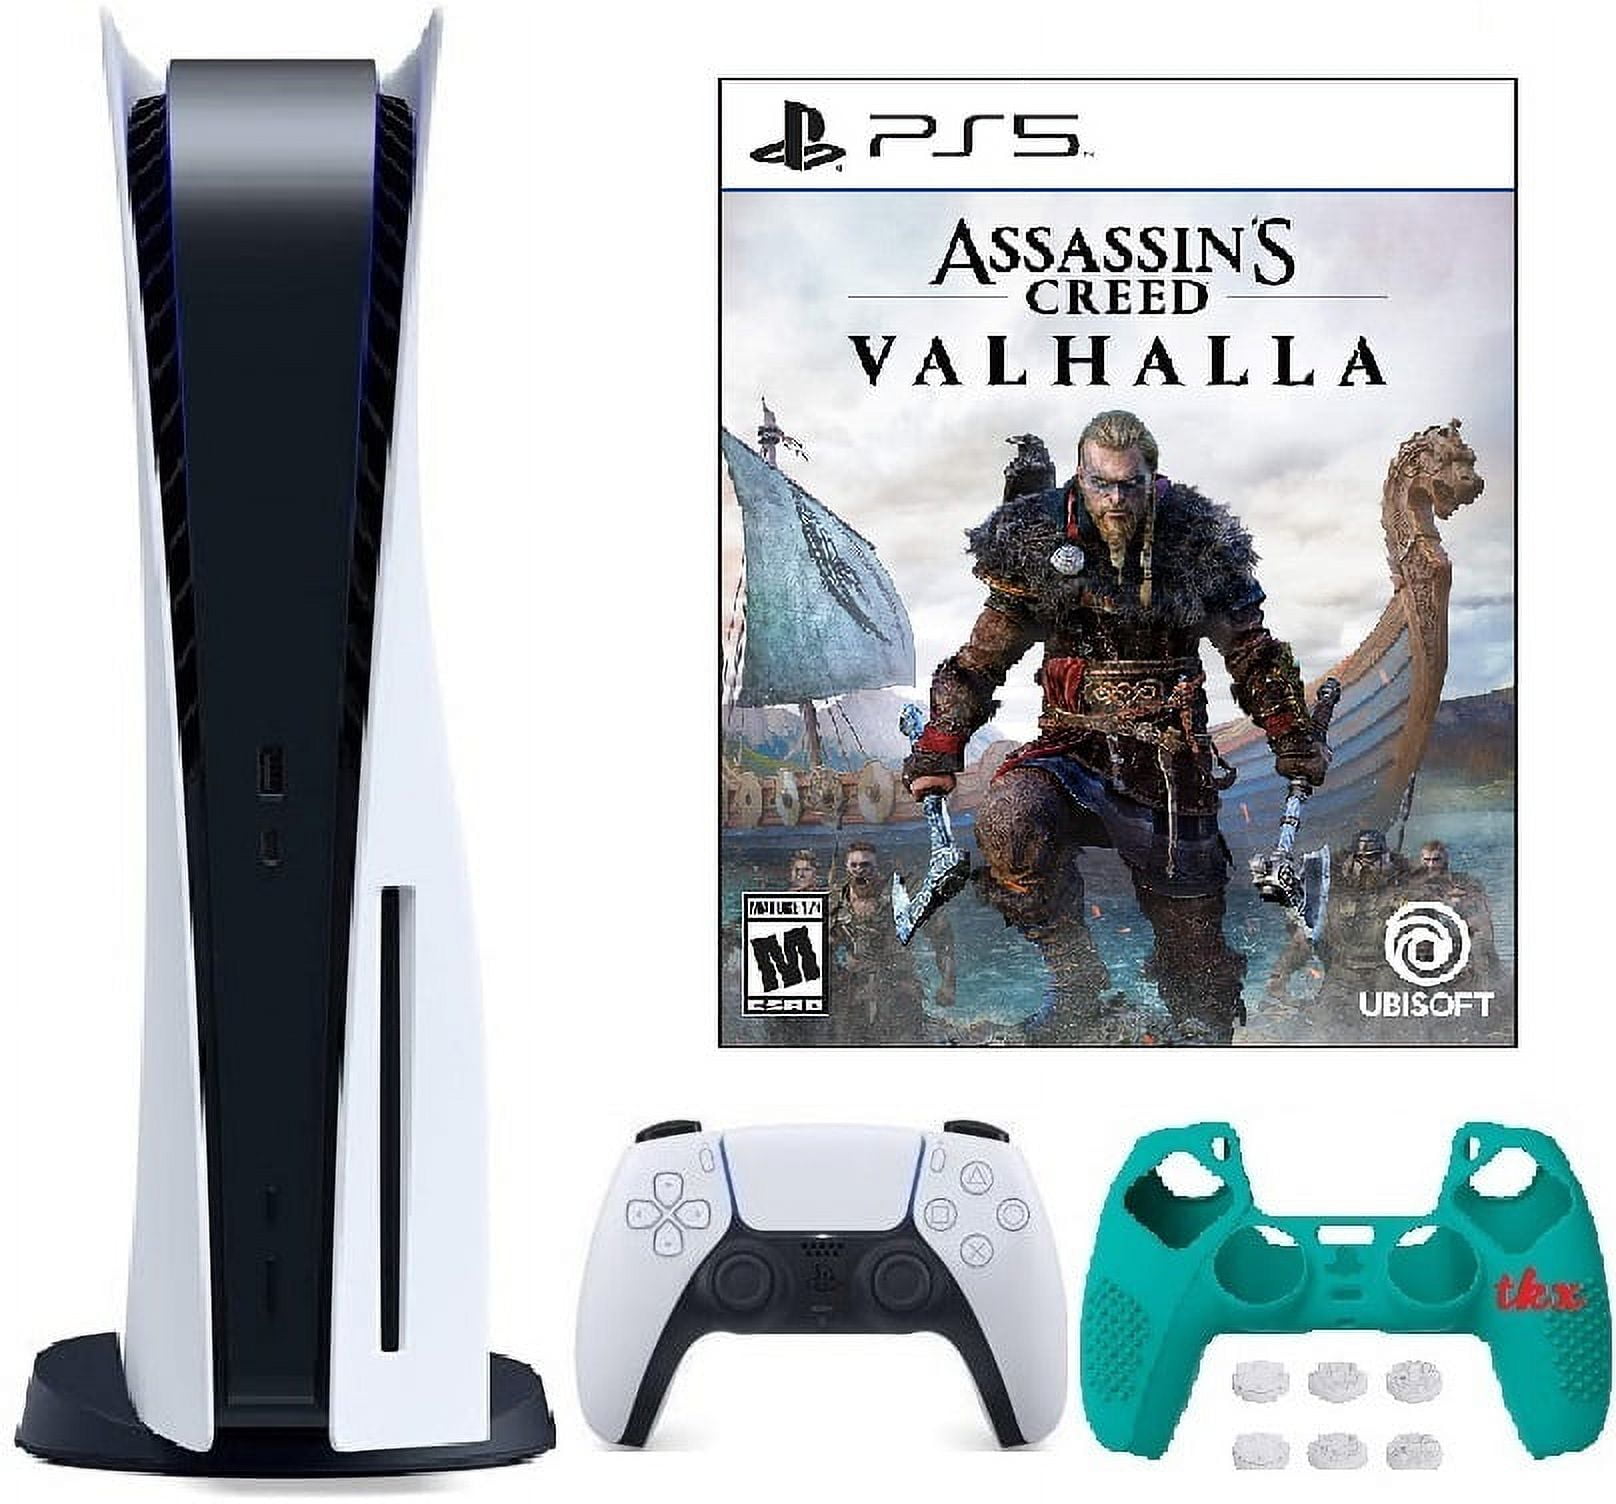 Assassin's Creed Valhalla for PC,PS4/PS5 (Digital),Xbox (Digital